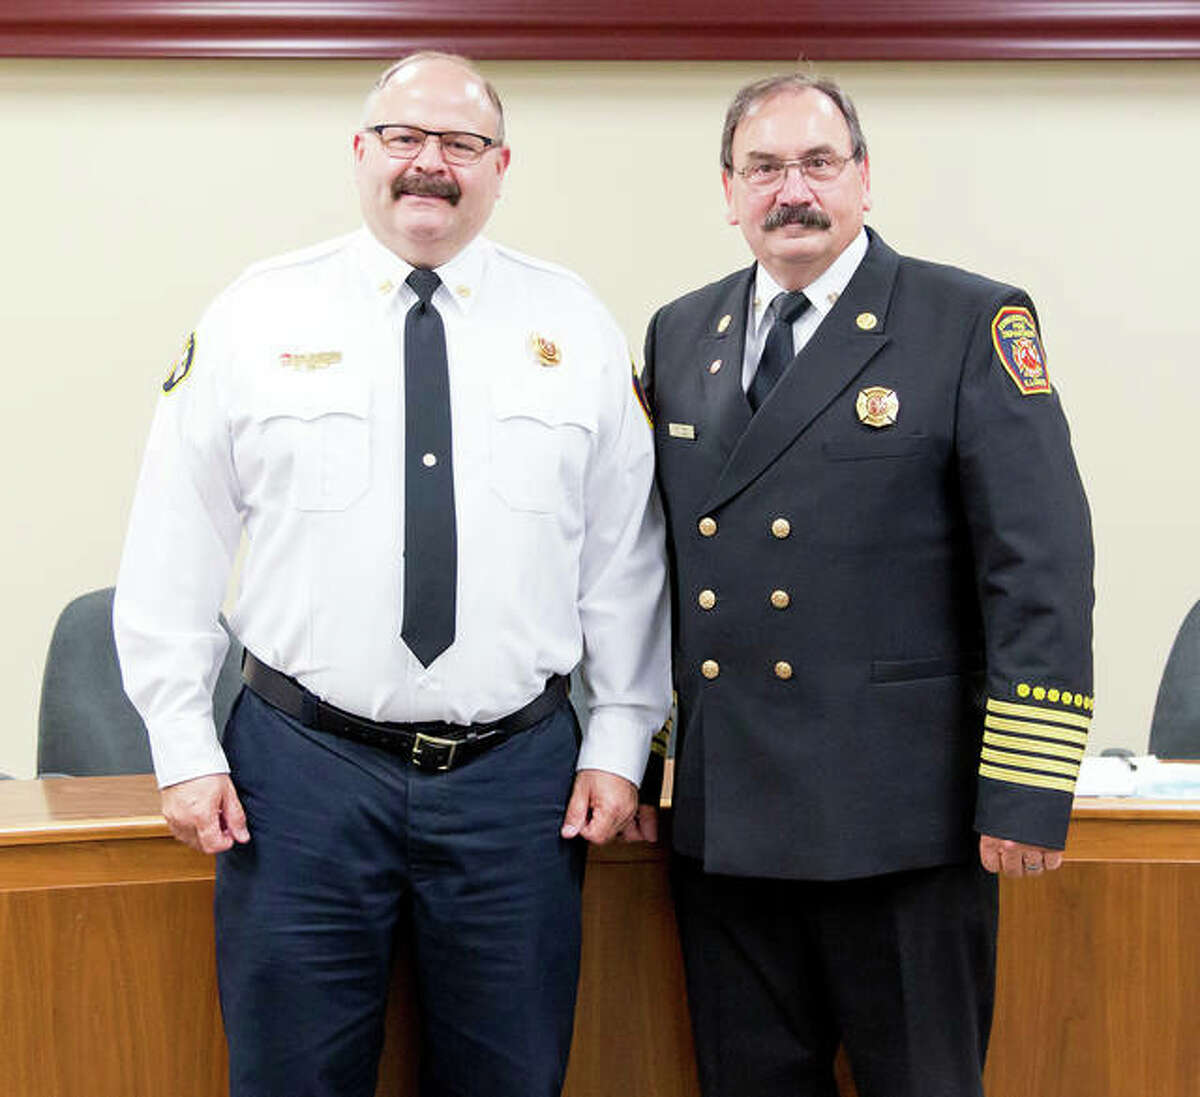 Dep. Fire Chief James Whiteford, left, will become the city’s new fire chief Monday as he succeeds Fire Chief Rick Welle, right.